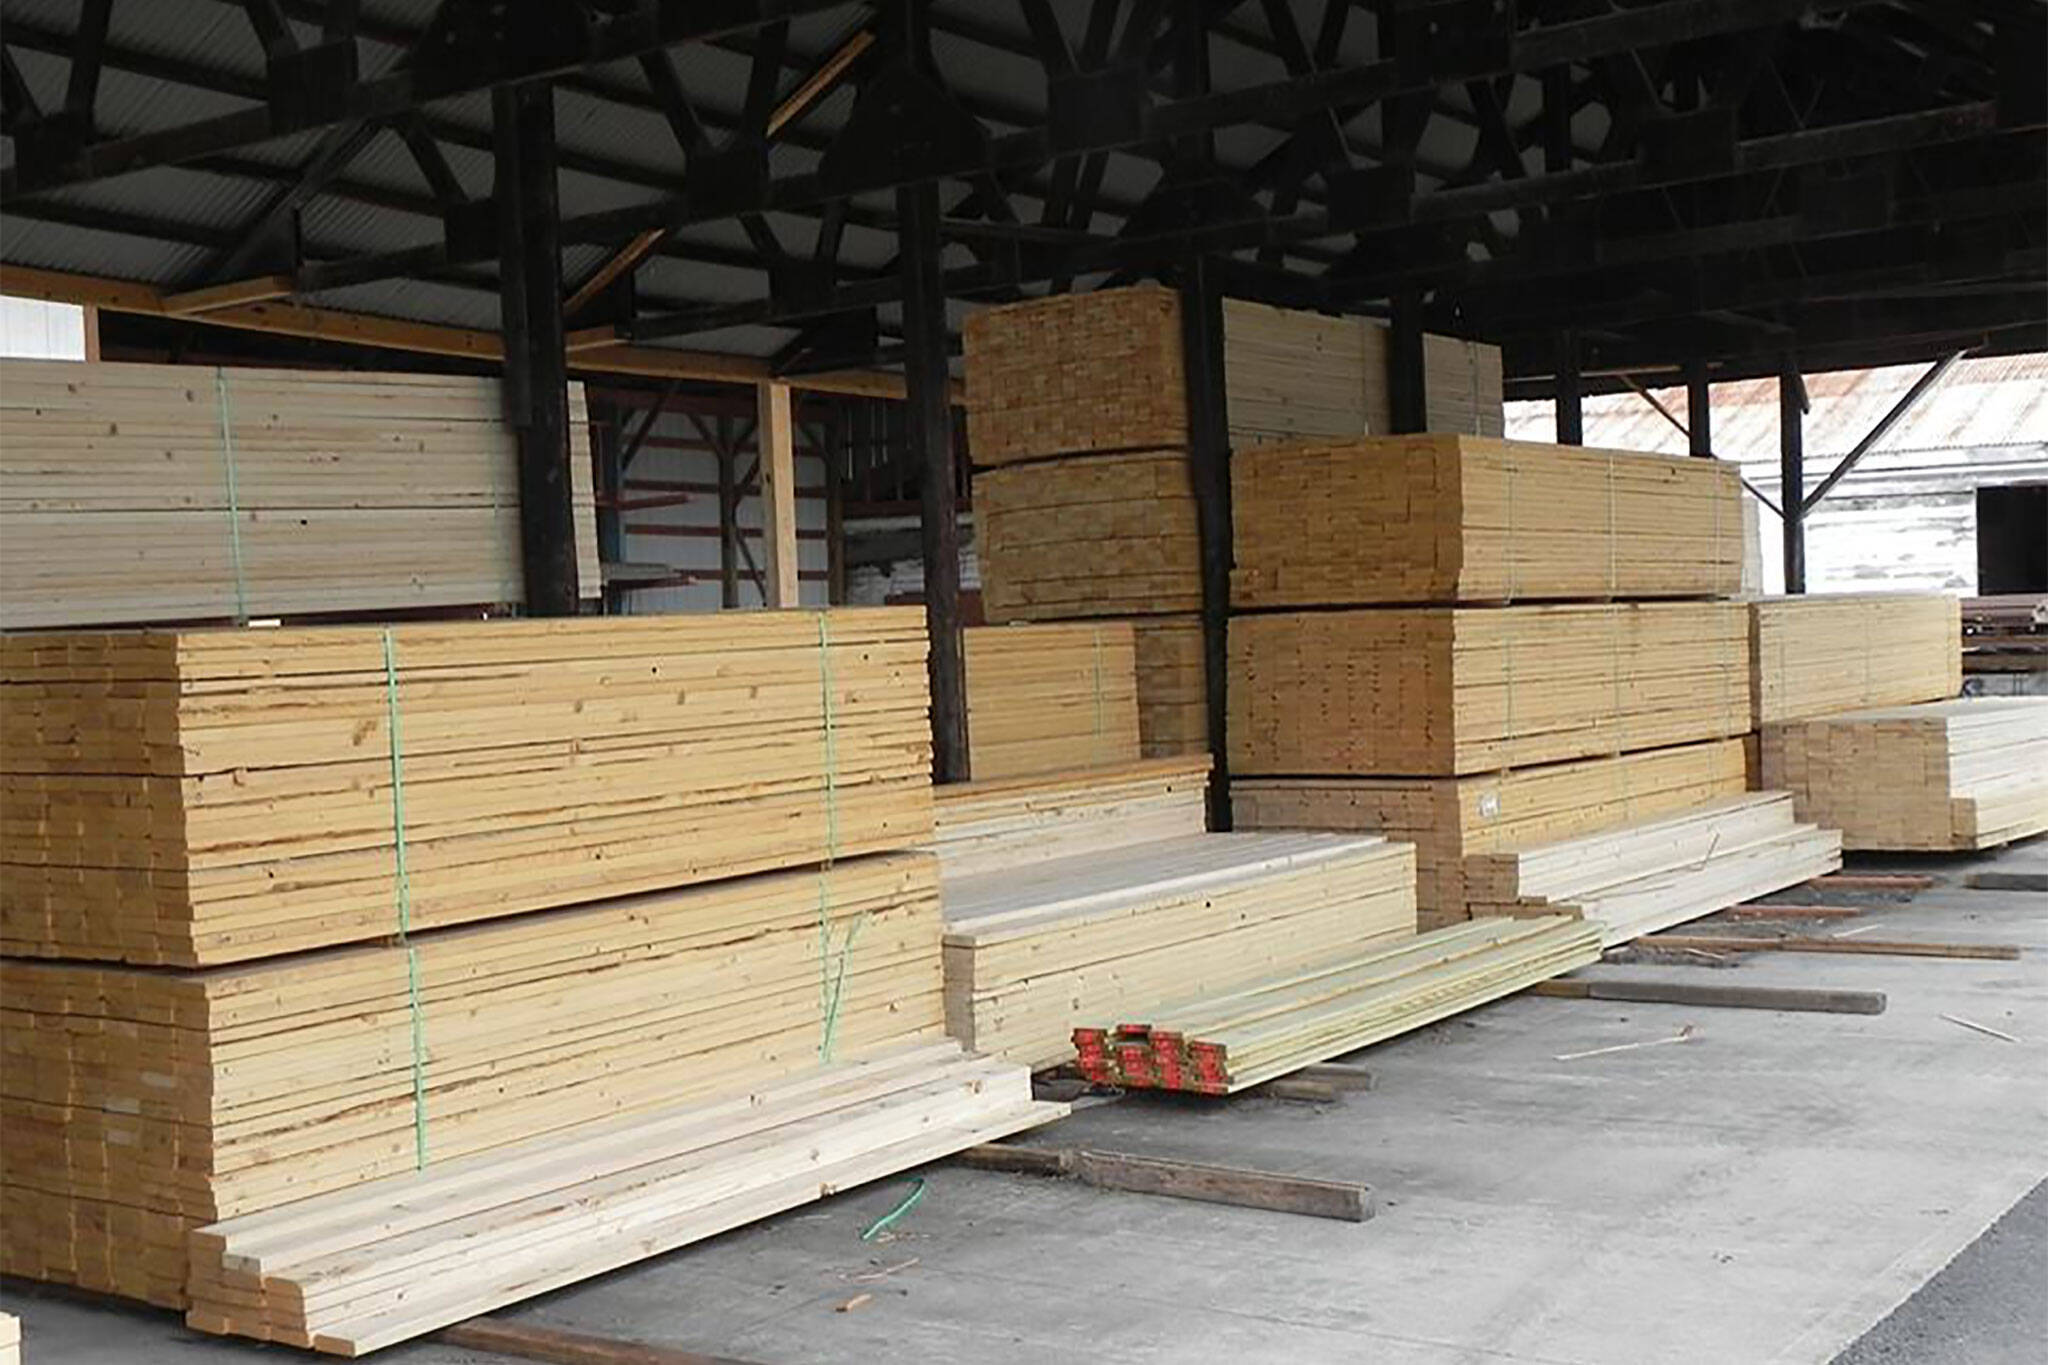 The top 5 places to buy lumber in Toronto